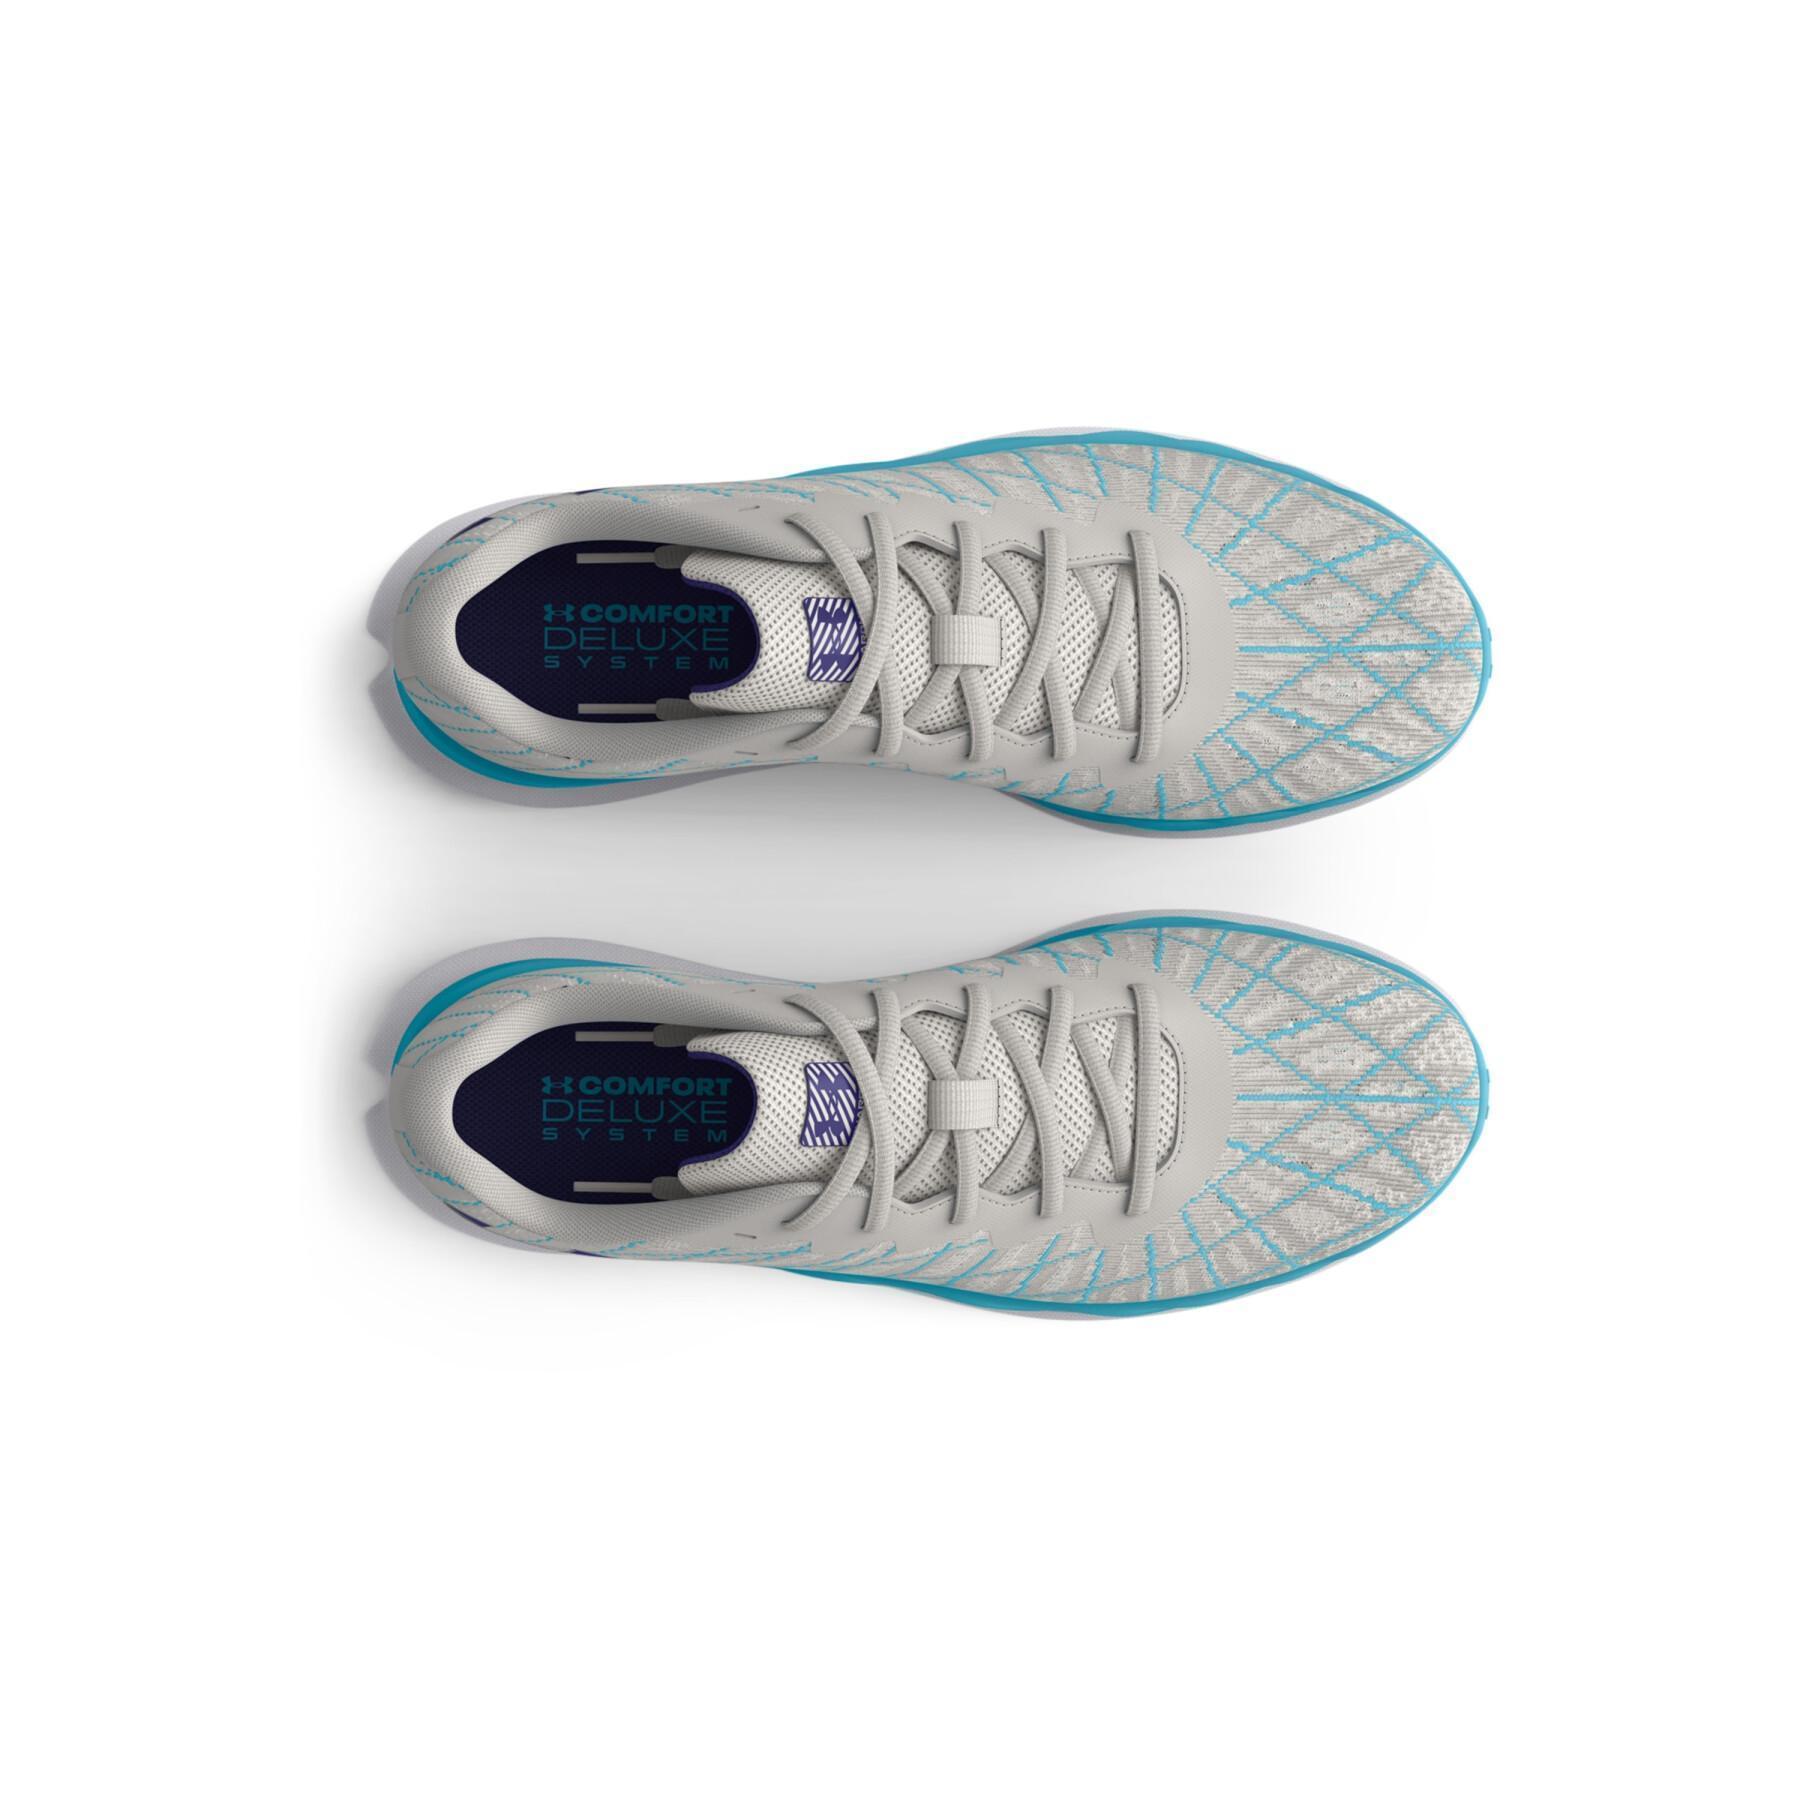 Buty damskie running Under Armour Charged Breeze 2